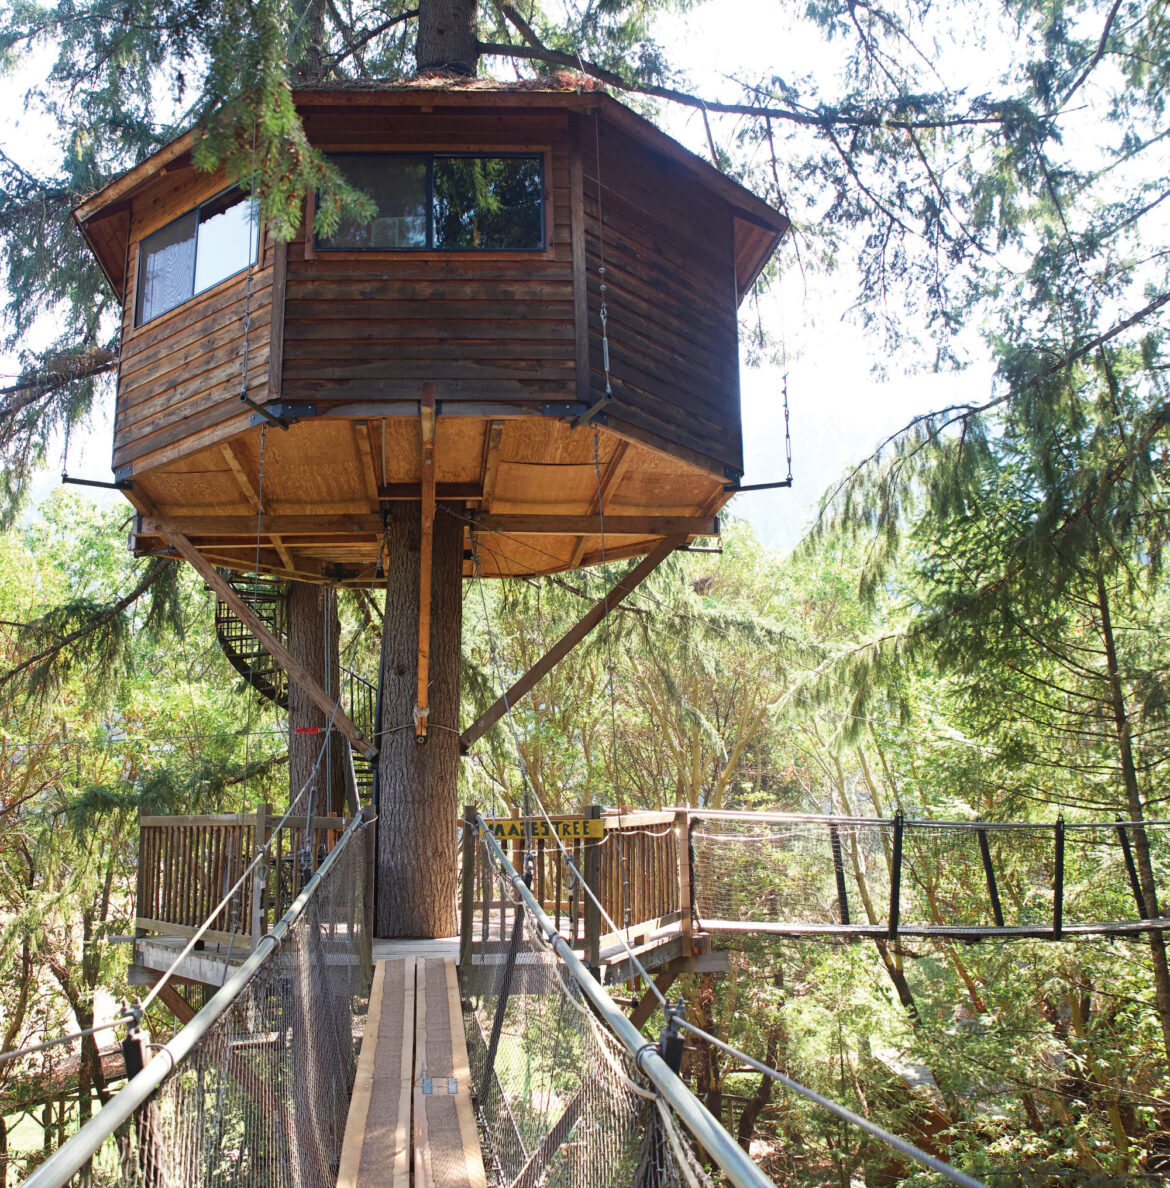 Out ‘N’ About Treehouse Treesort features an assemblage of unusual stays perfect for a memorable summer getaway.